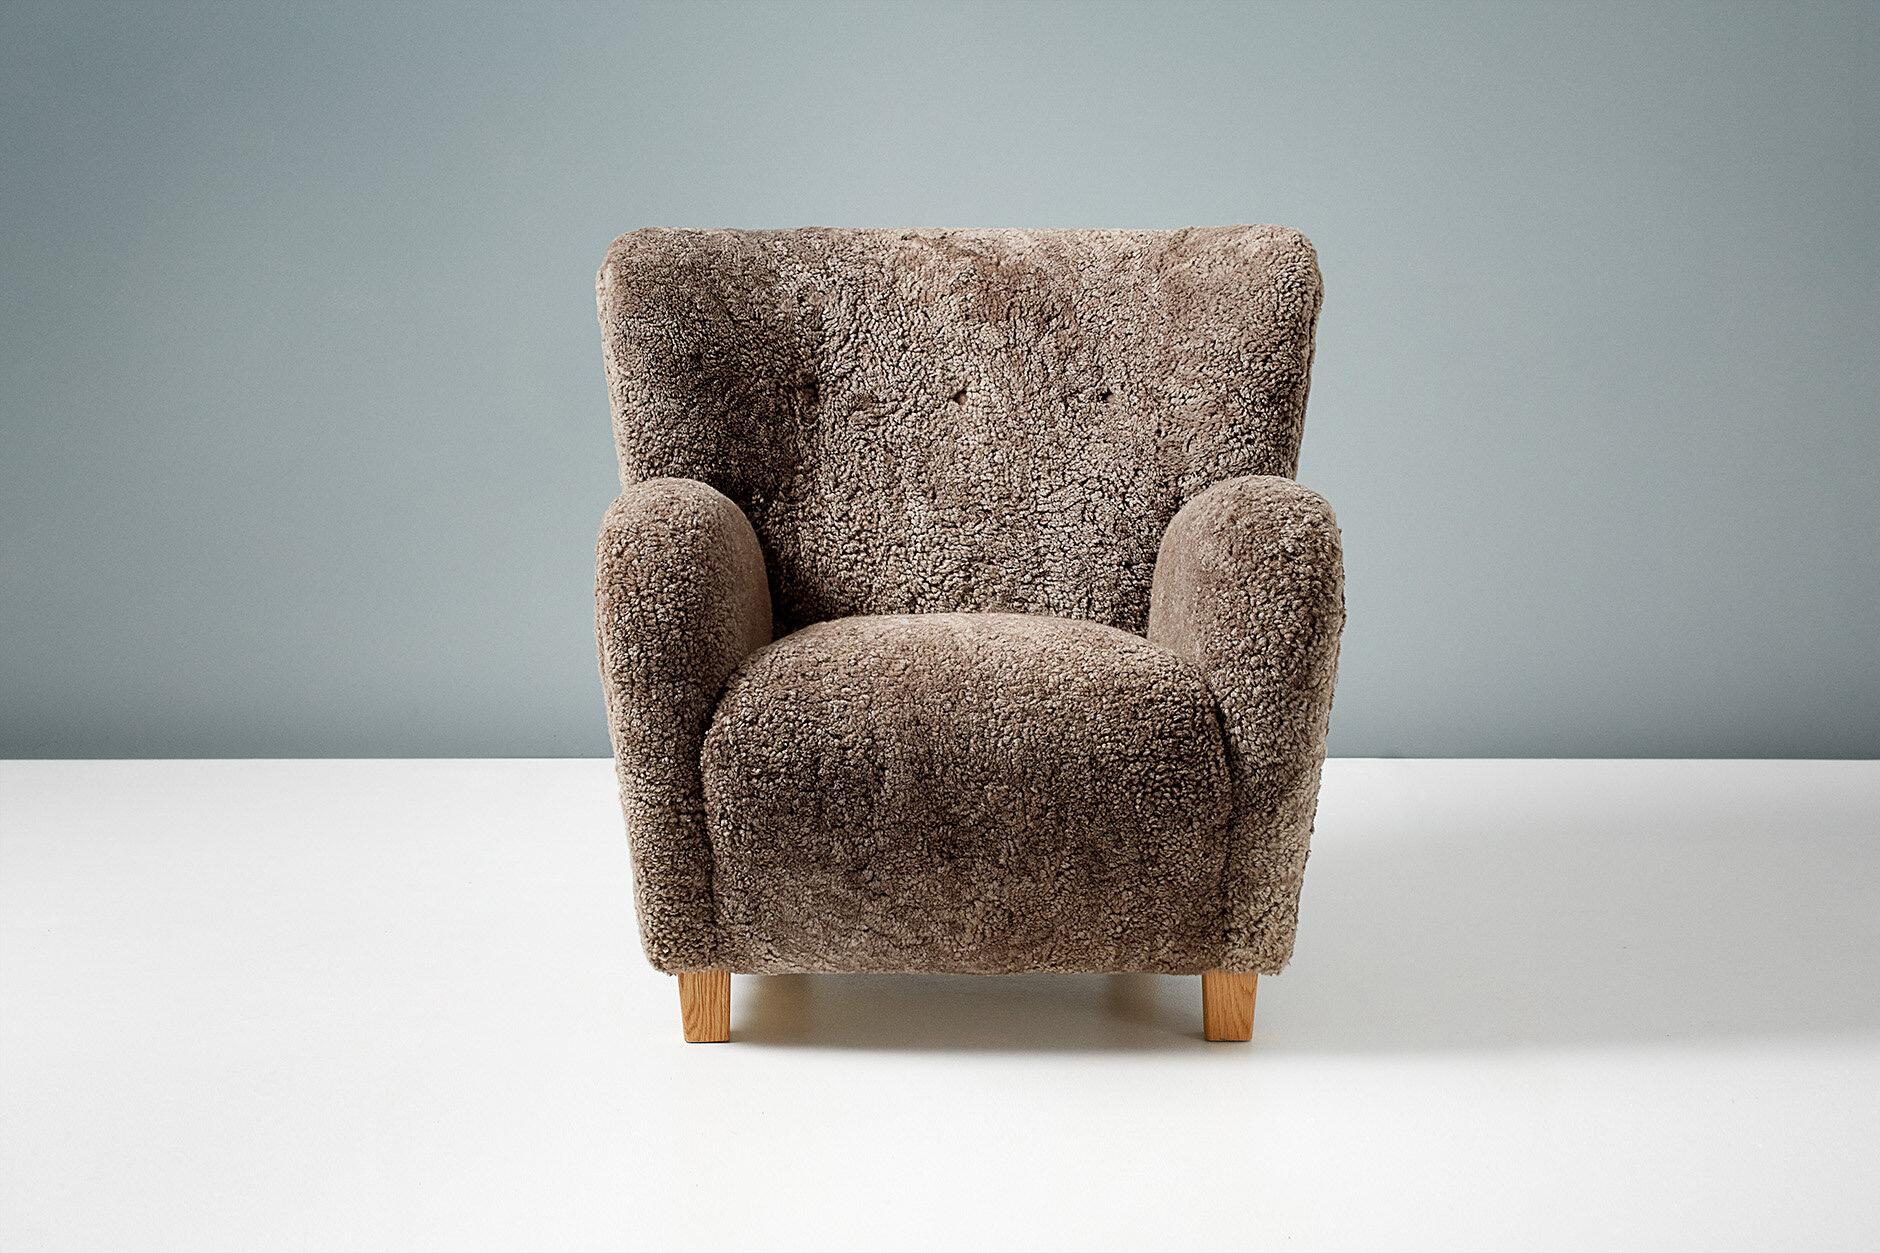 Dagmar Design - Karu lounge chair

These high-end lounge chairs are handmade to order at our workshops in the UK. The chair legs are available in oak or beechwood in a range of finishes. The frames are made from solid beechwood with a fully sprung